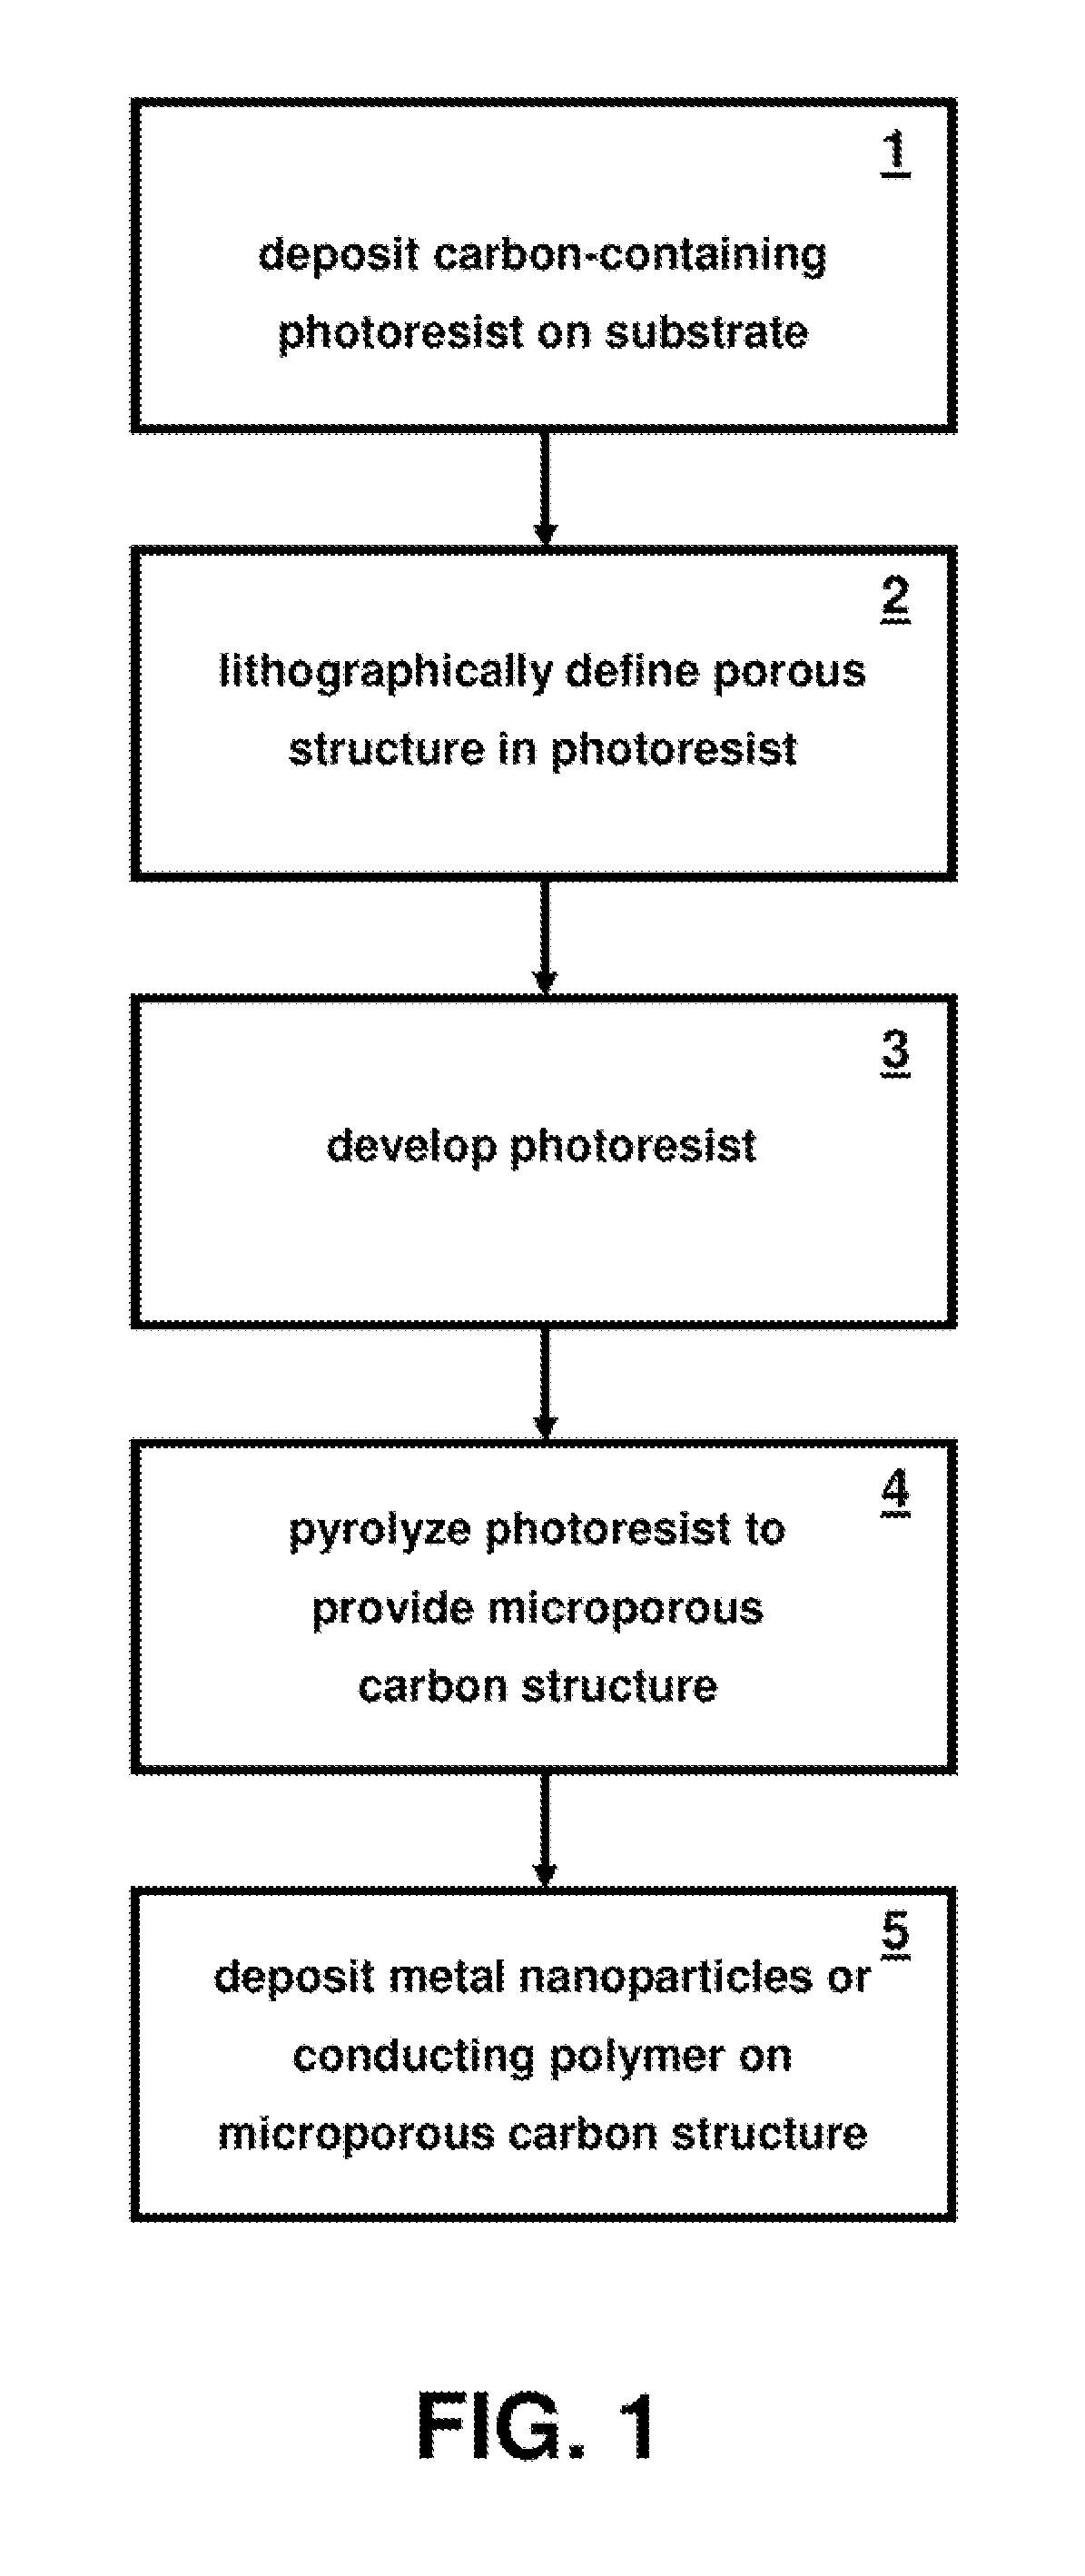 Lithographically defined microporous carbon structures